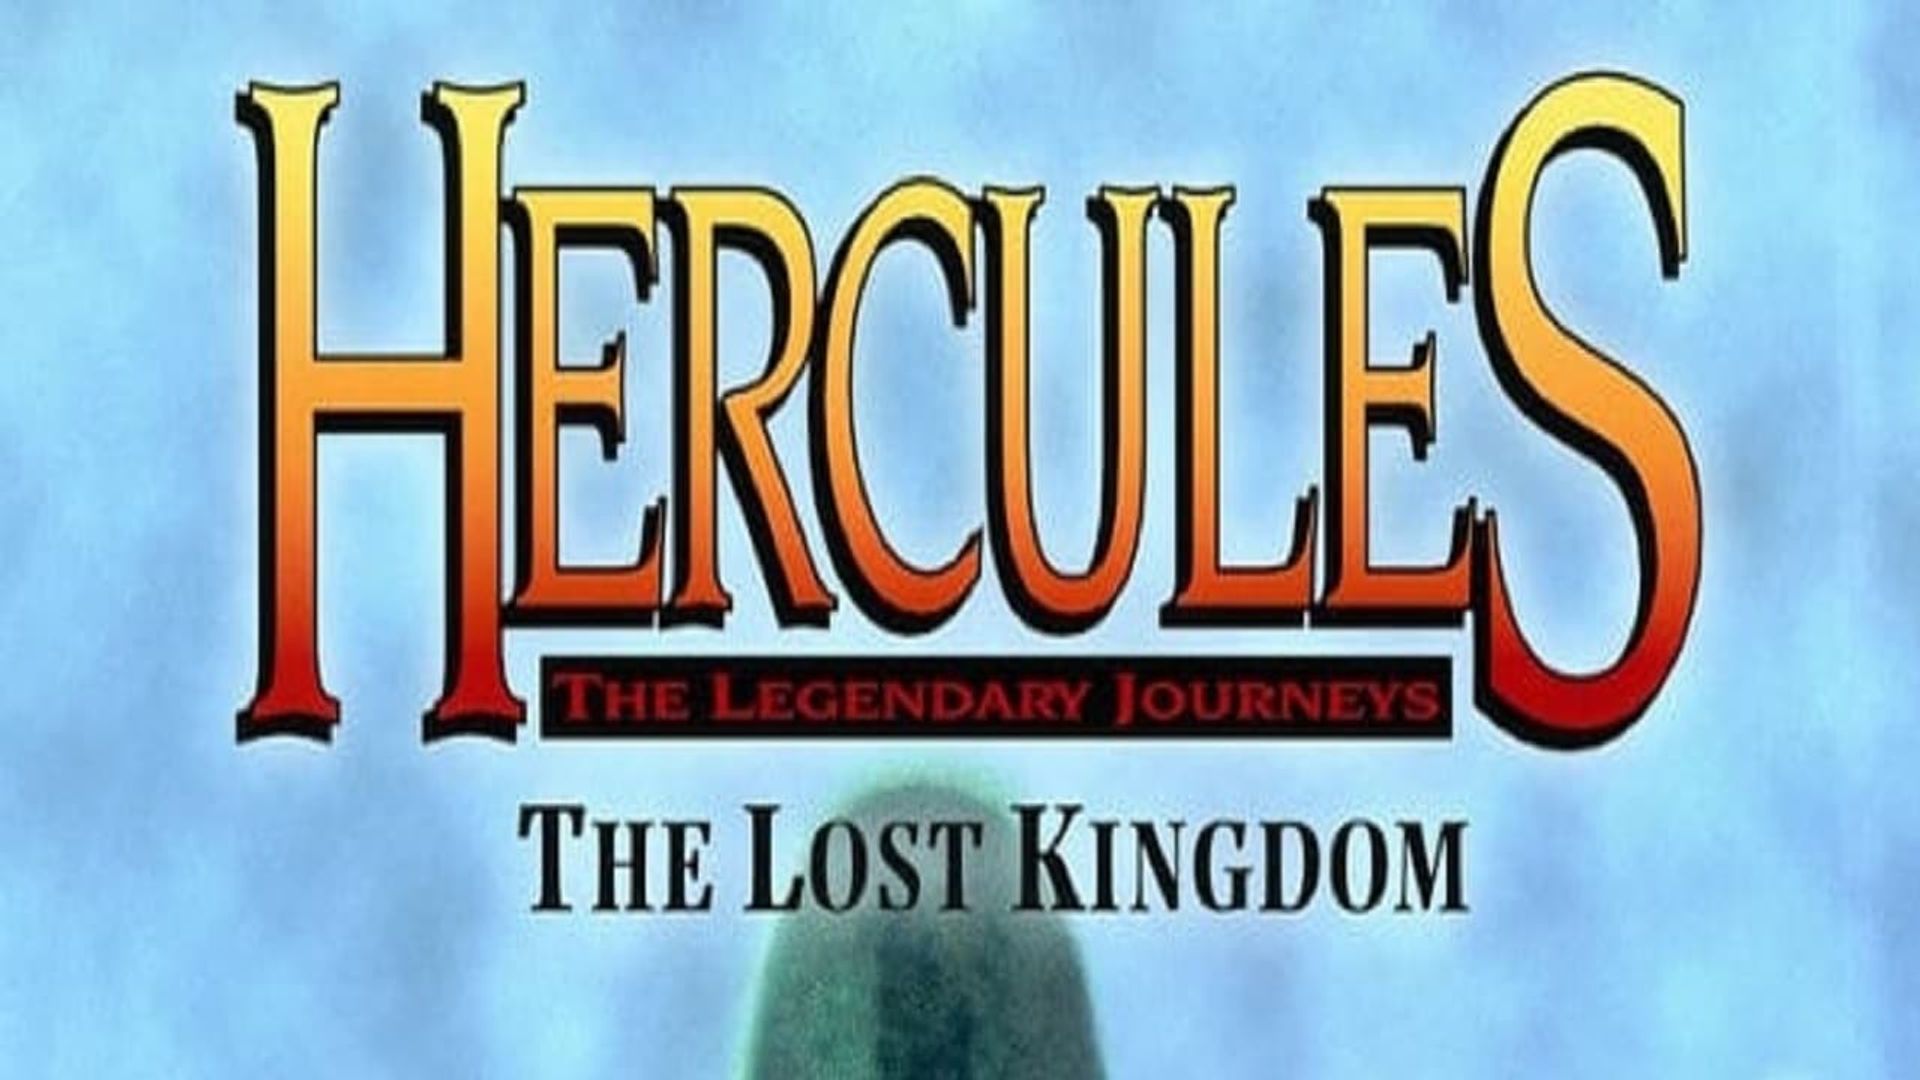 Hercules and the Lost Kingdom Backdrop